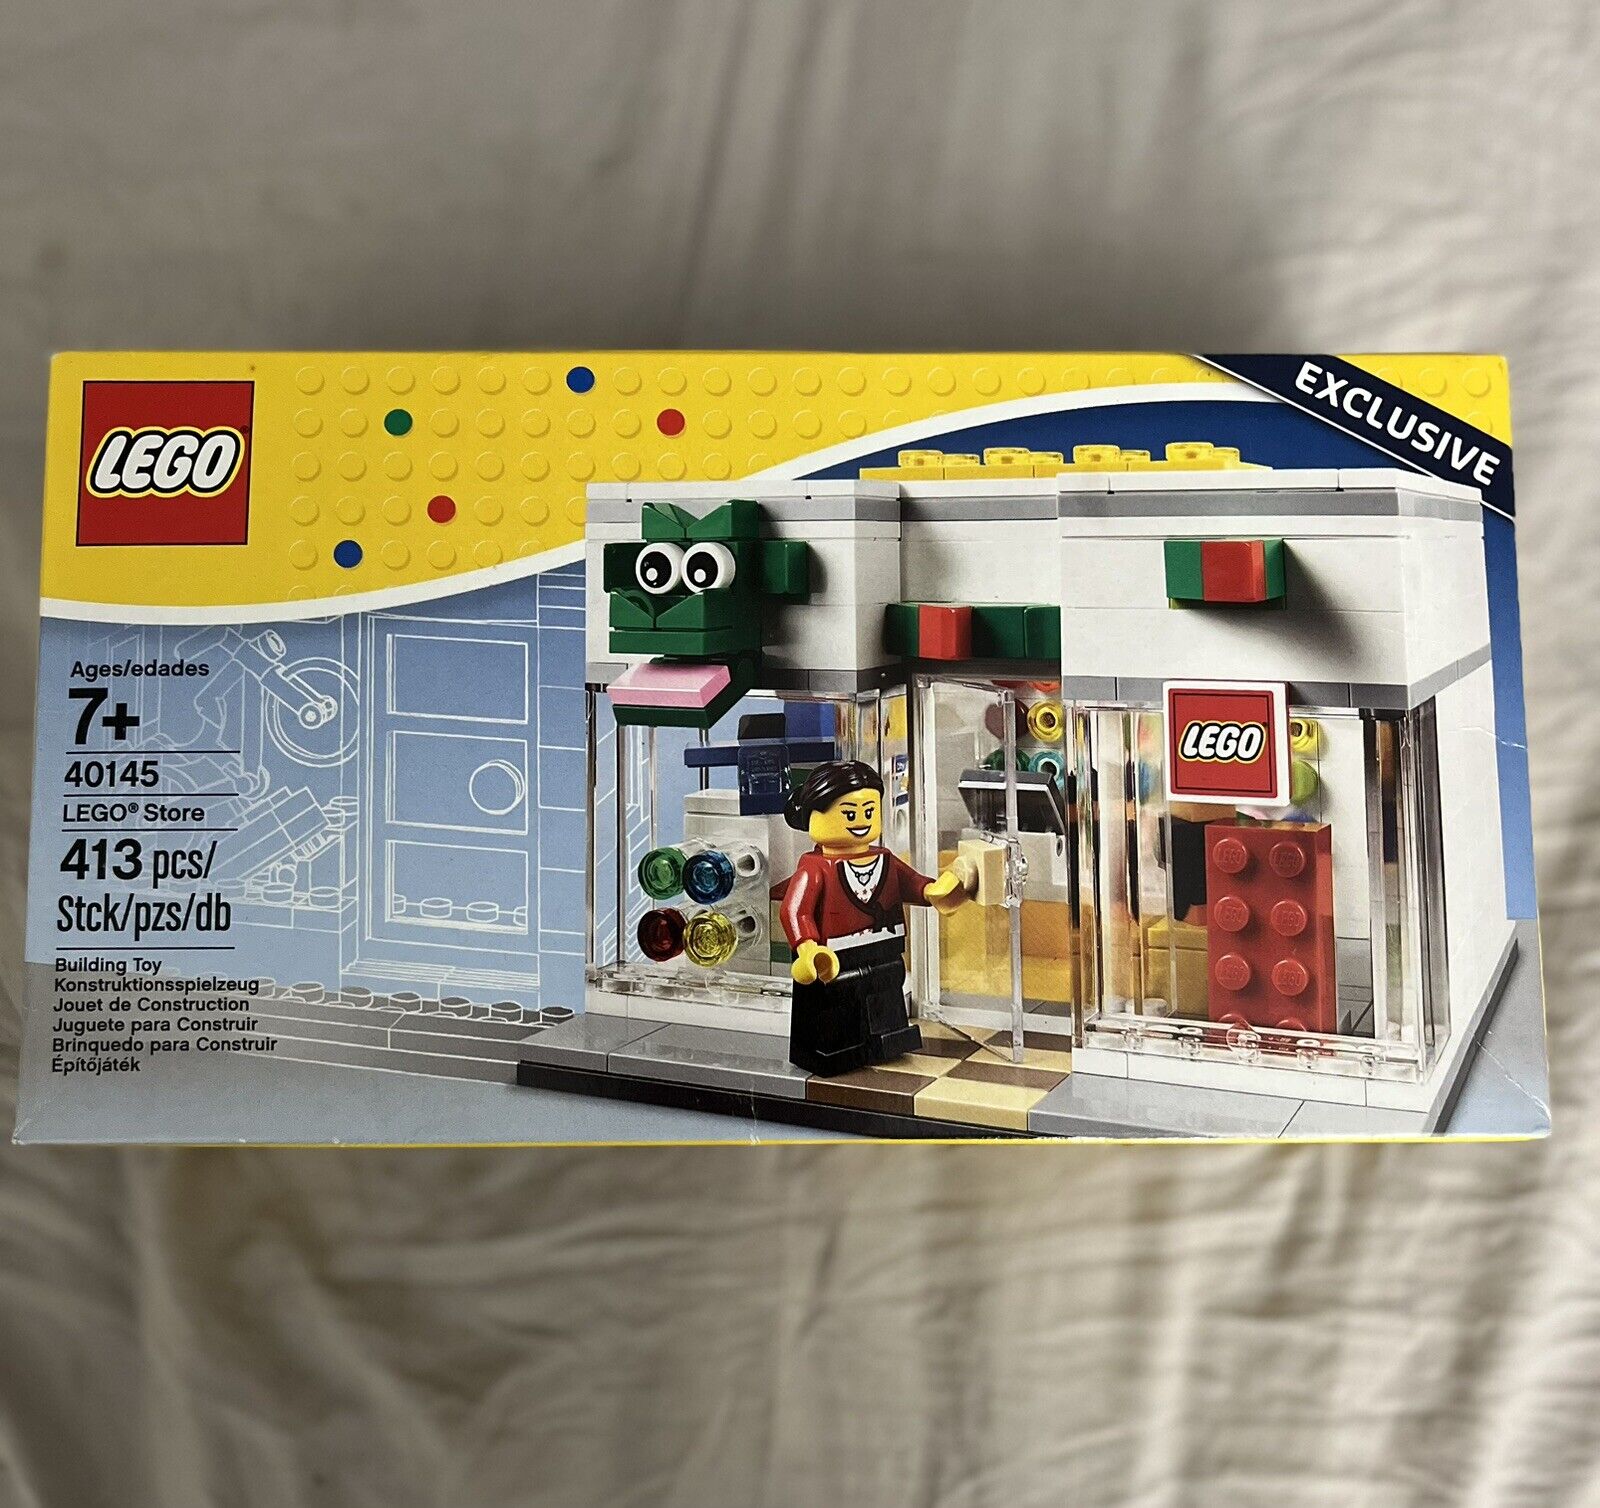 LEGO Brand Retail Store Set 40145 Promotional Set - Brand New And Sealed